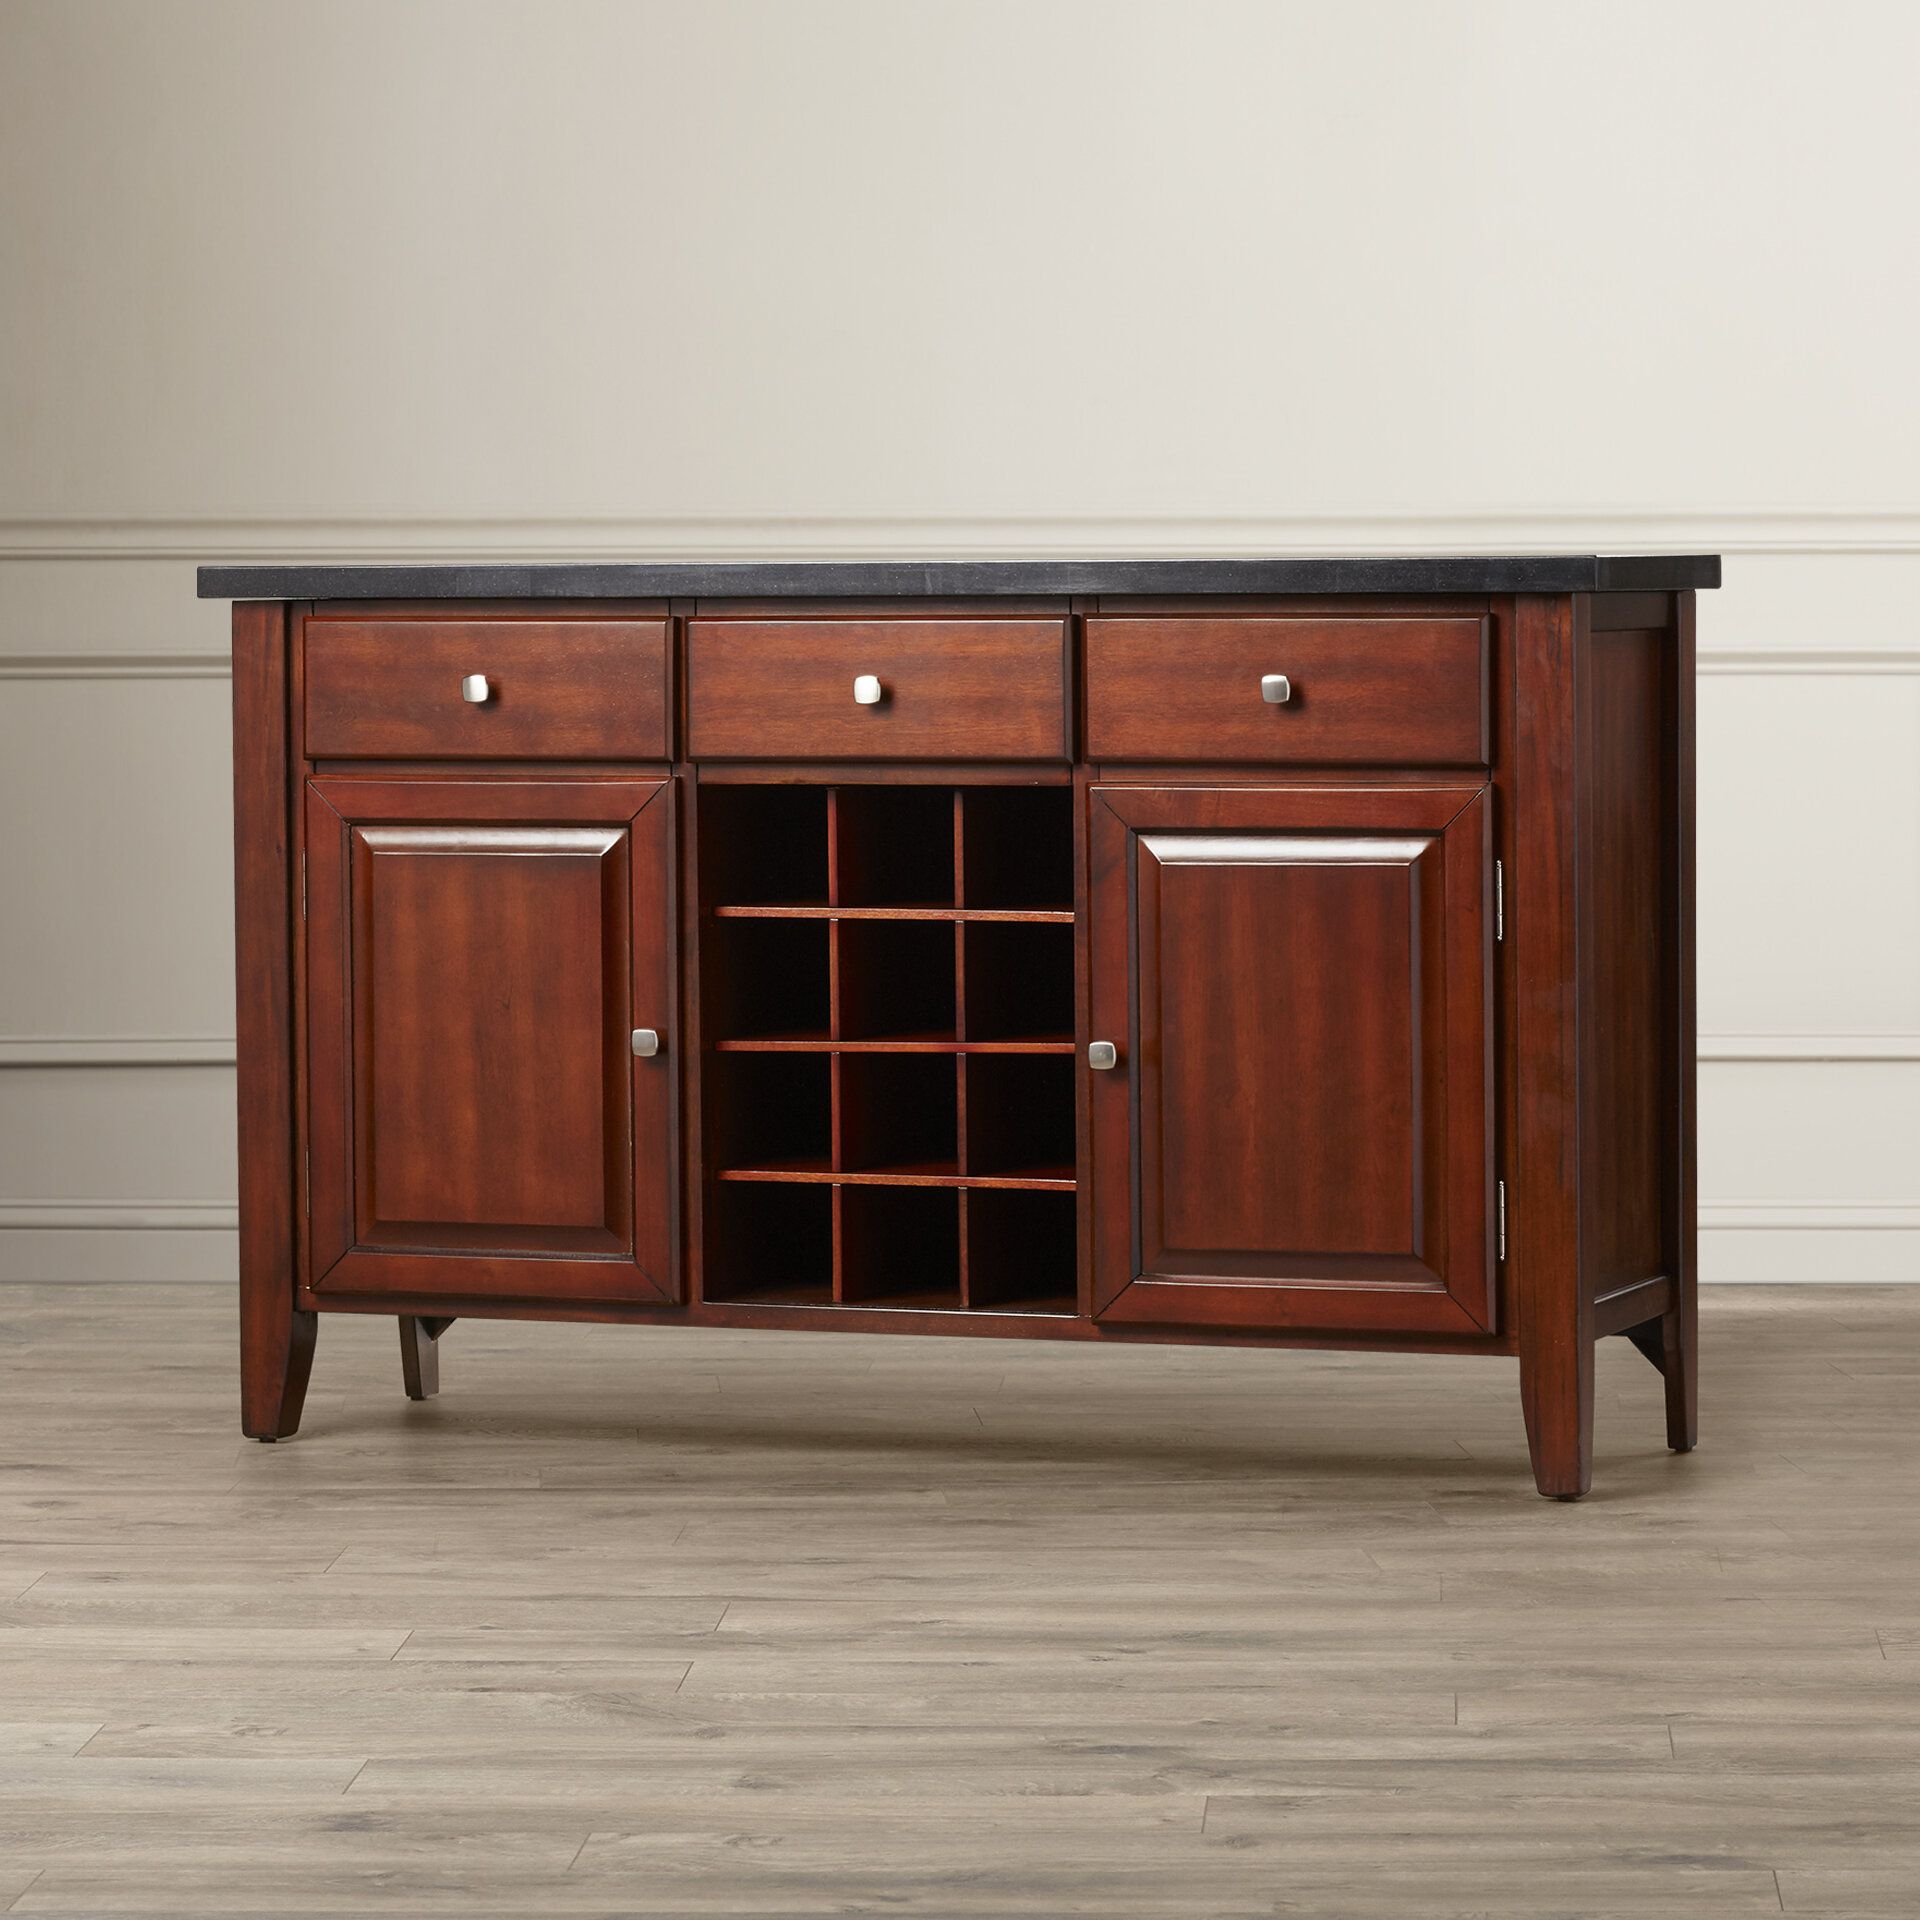 Farmhouse & Rustic Darby Home Co Sideboards & Buffets For Velazco Sideboards (View 30 of 30)